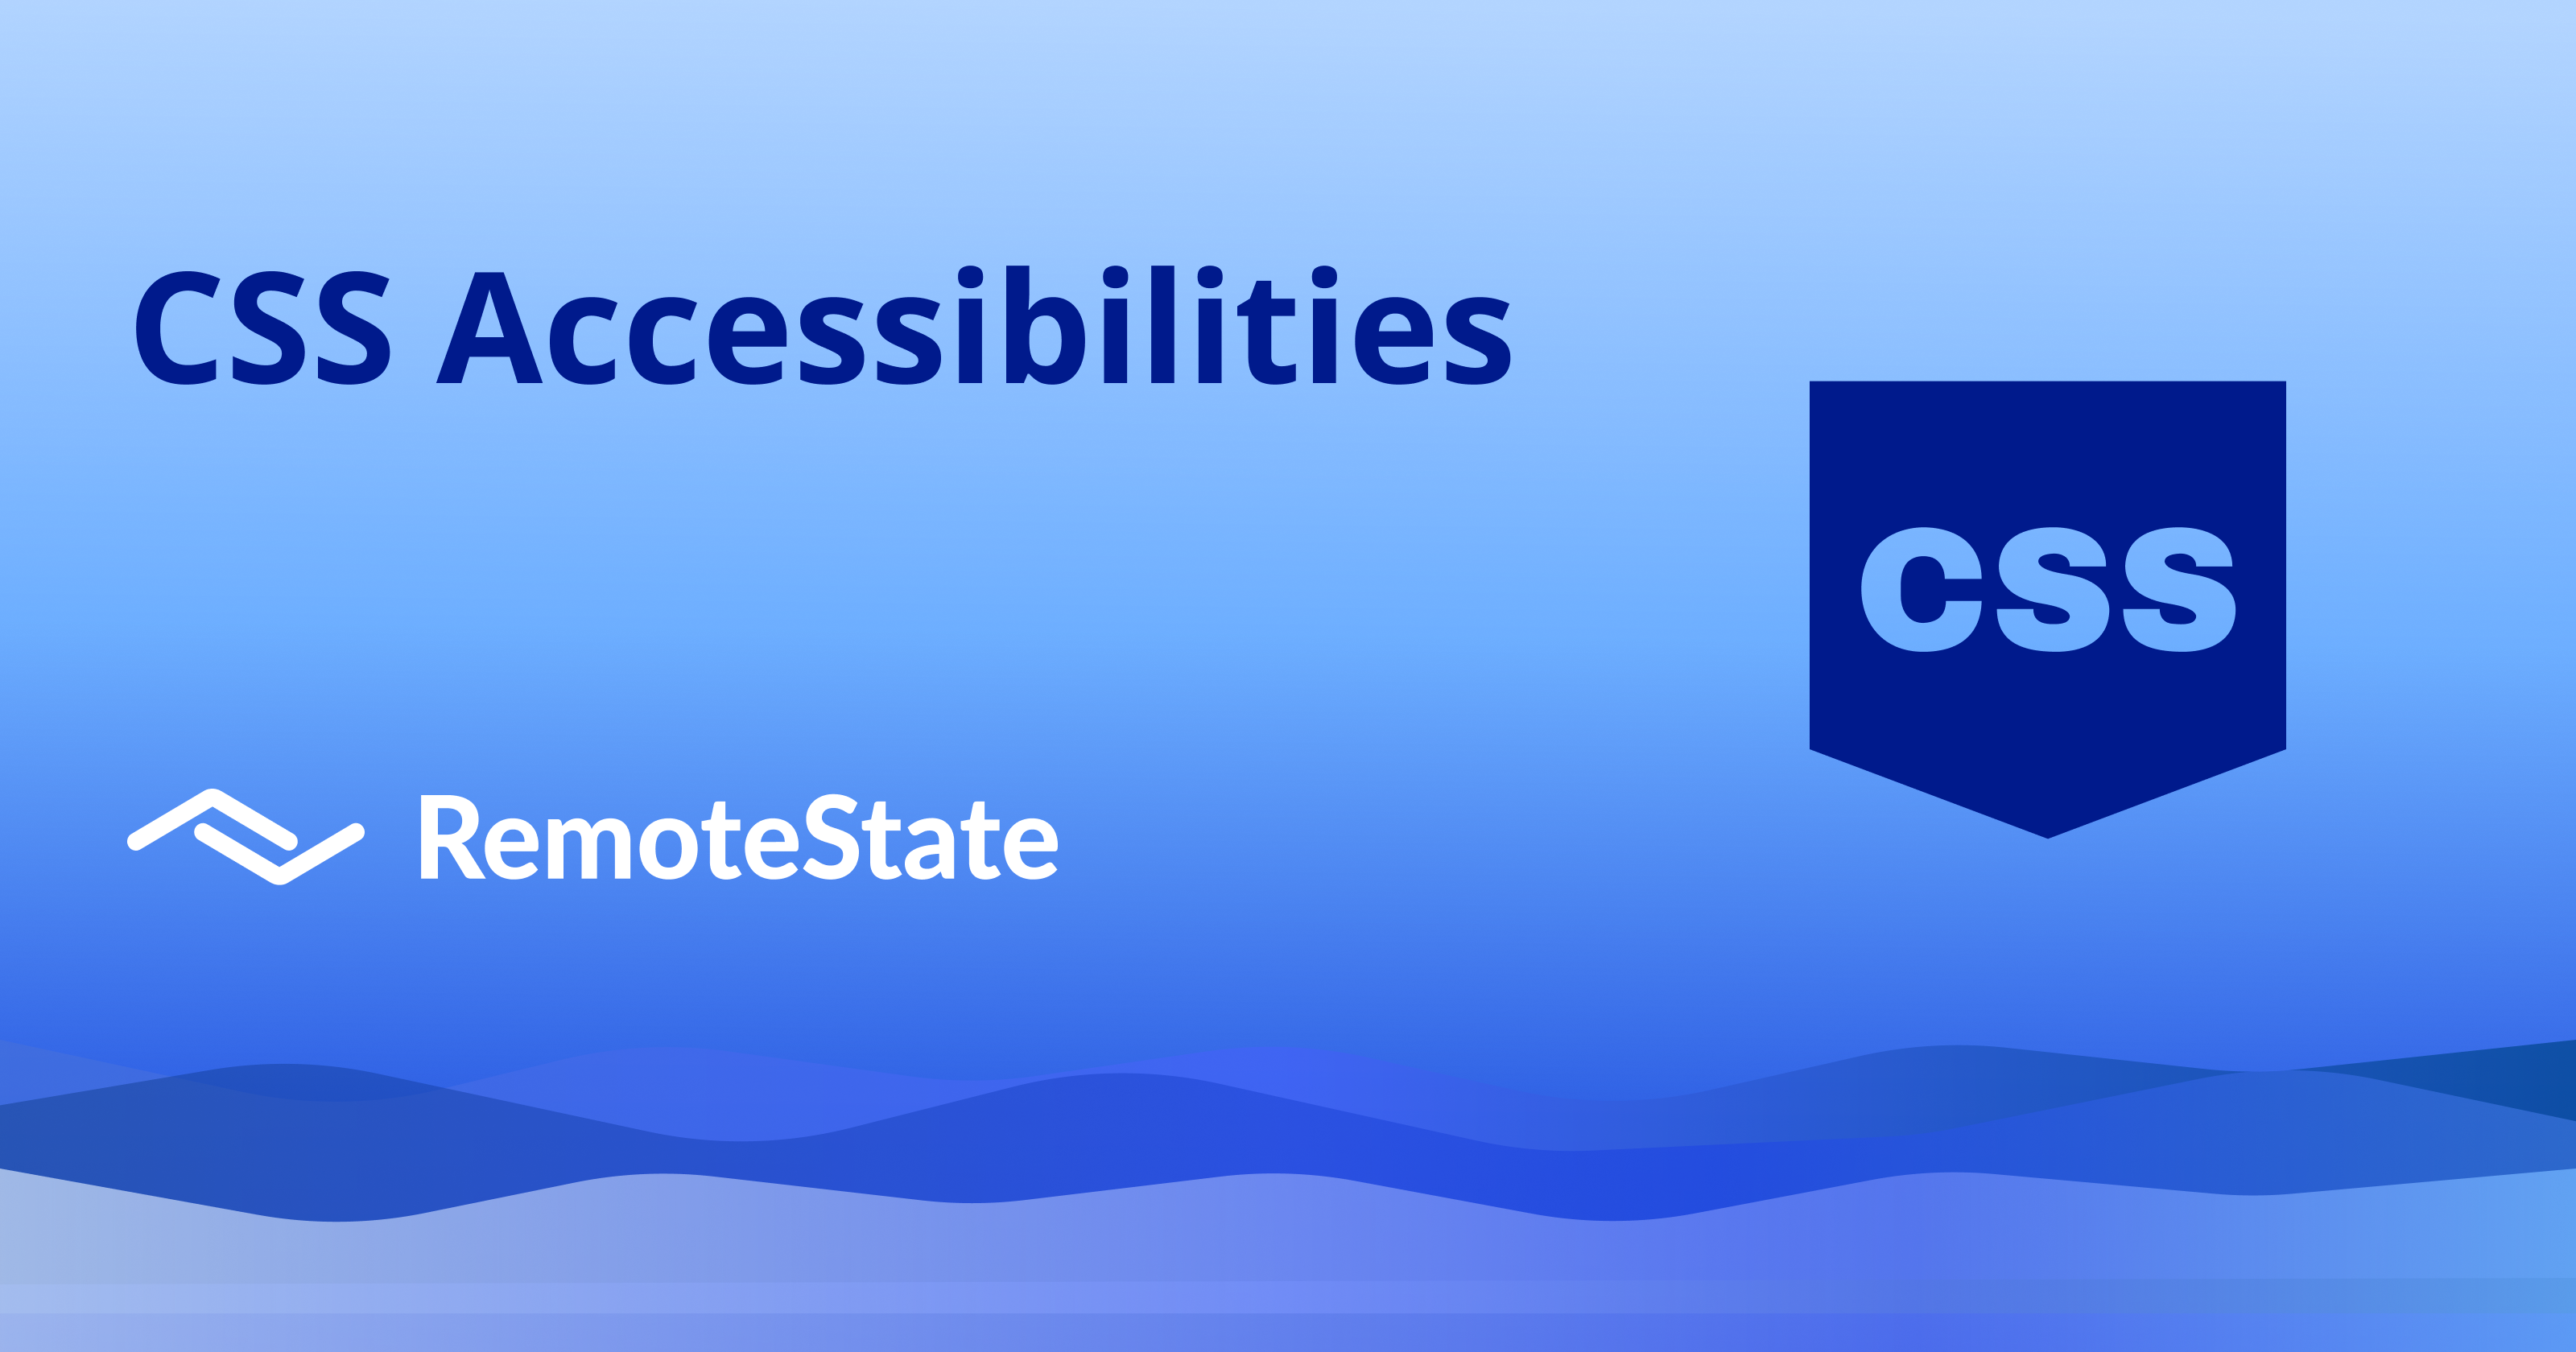 CSS Accessibilities